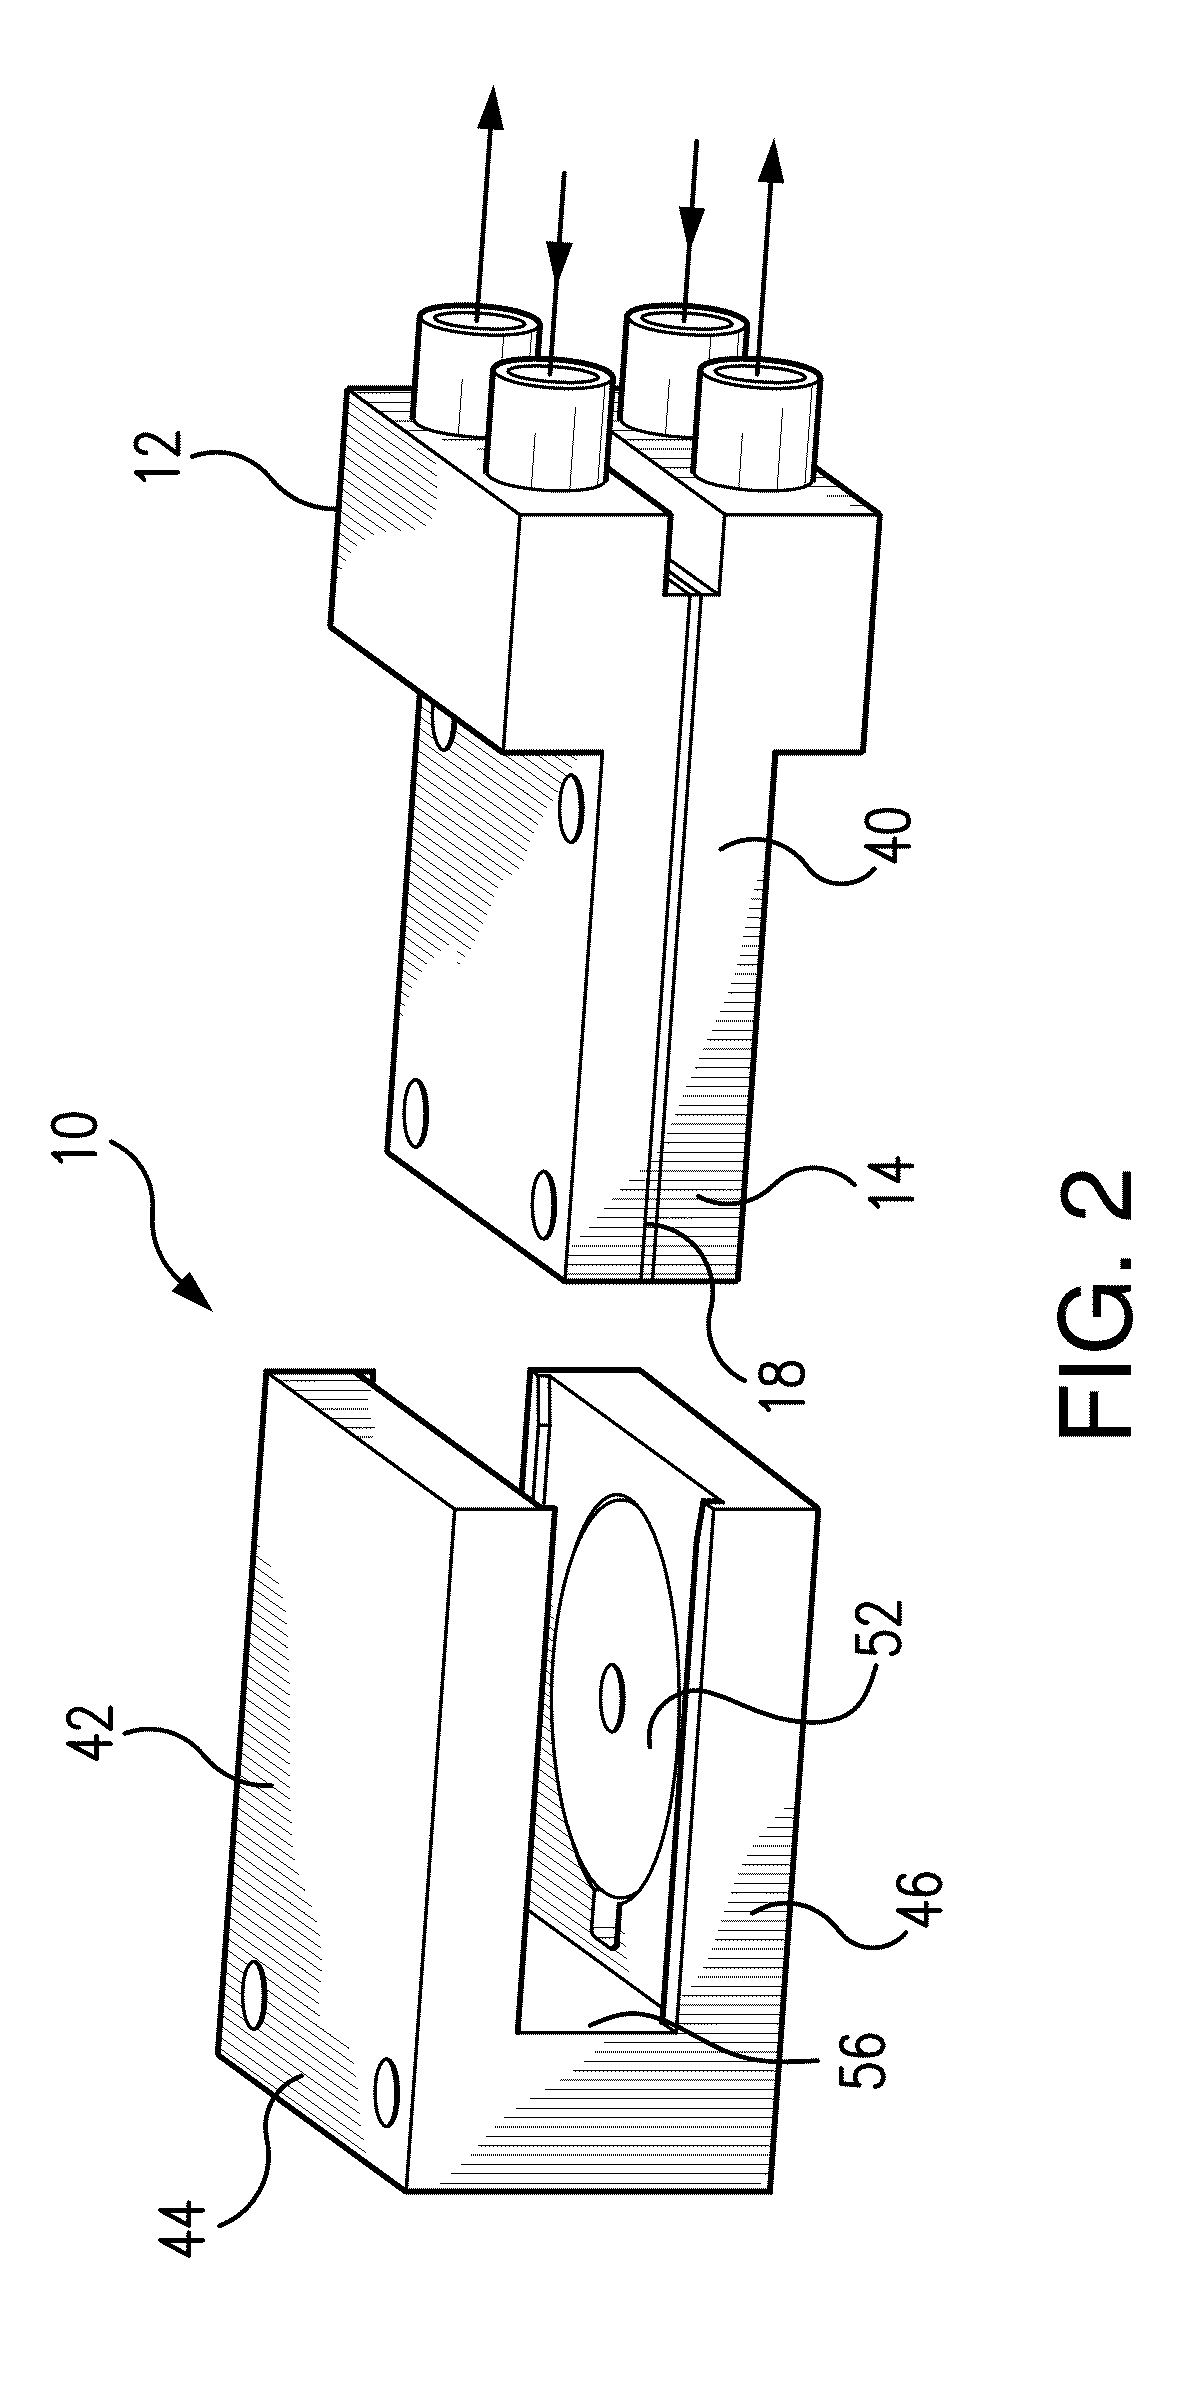 Flow Control System for a Micropump